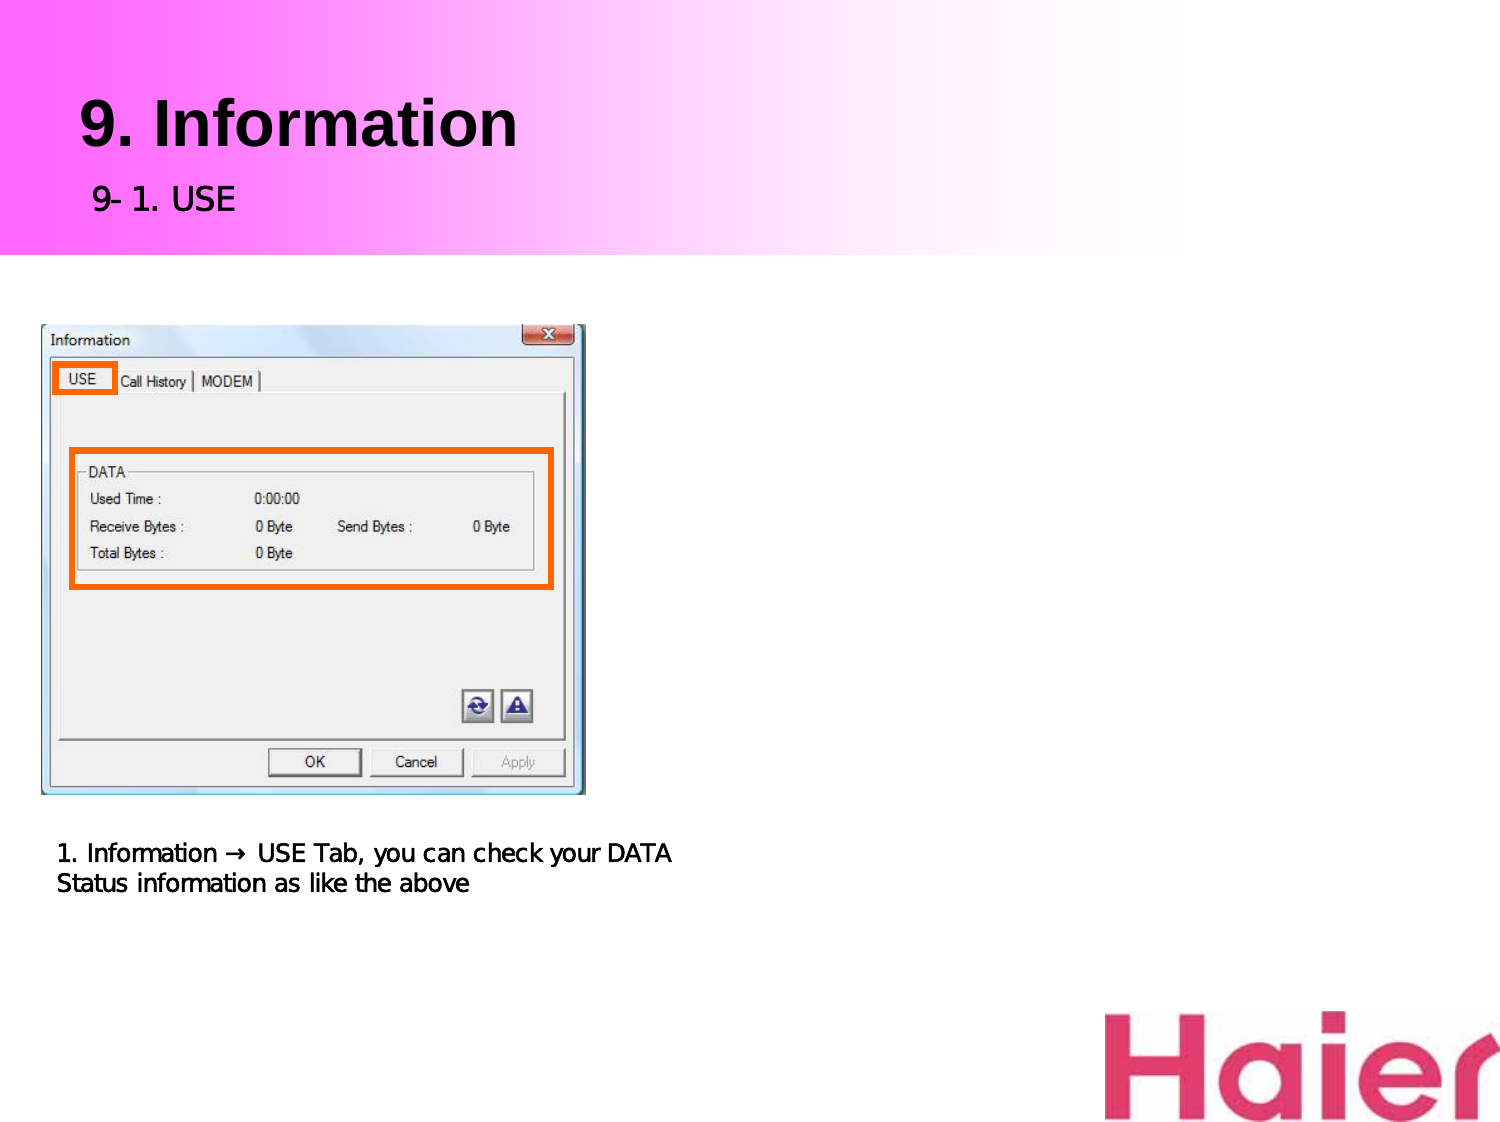 9. Information1. Information → USE Tab, you can check your DATA Status information as like the above9-1. USE